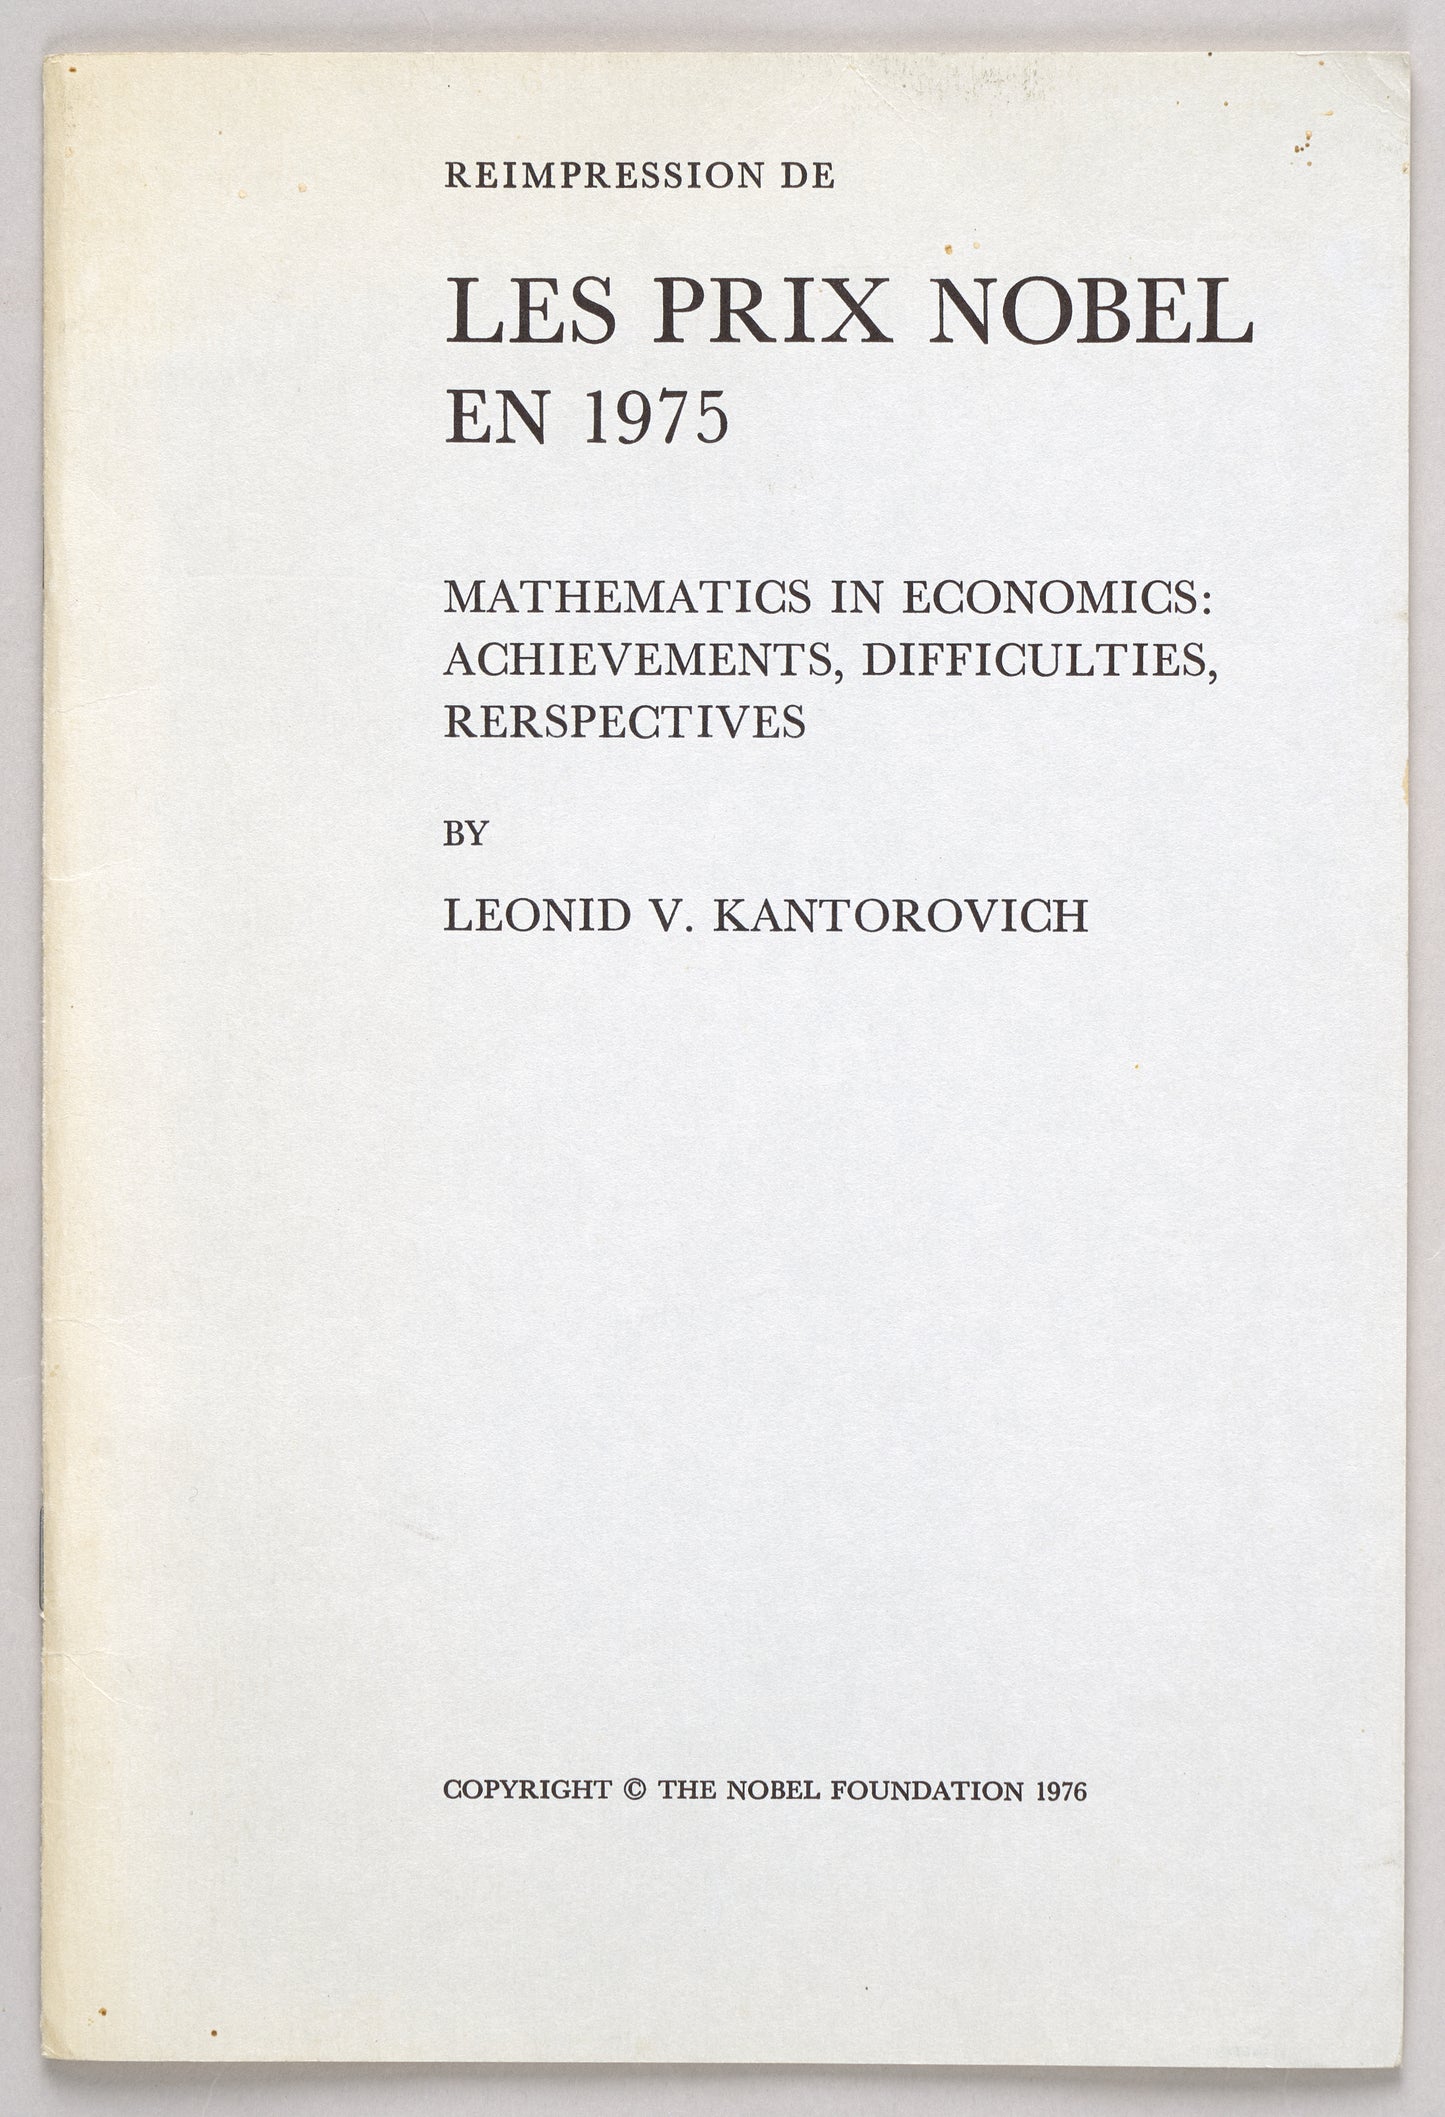 Mathematics in Economics. Signed by the Nobel prize laureate.